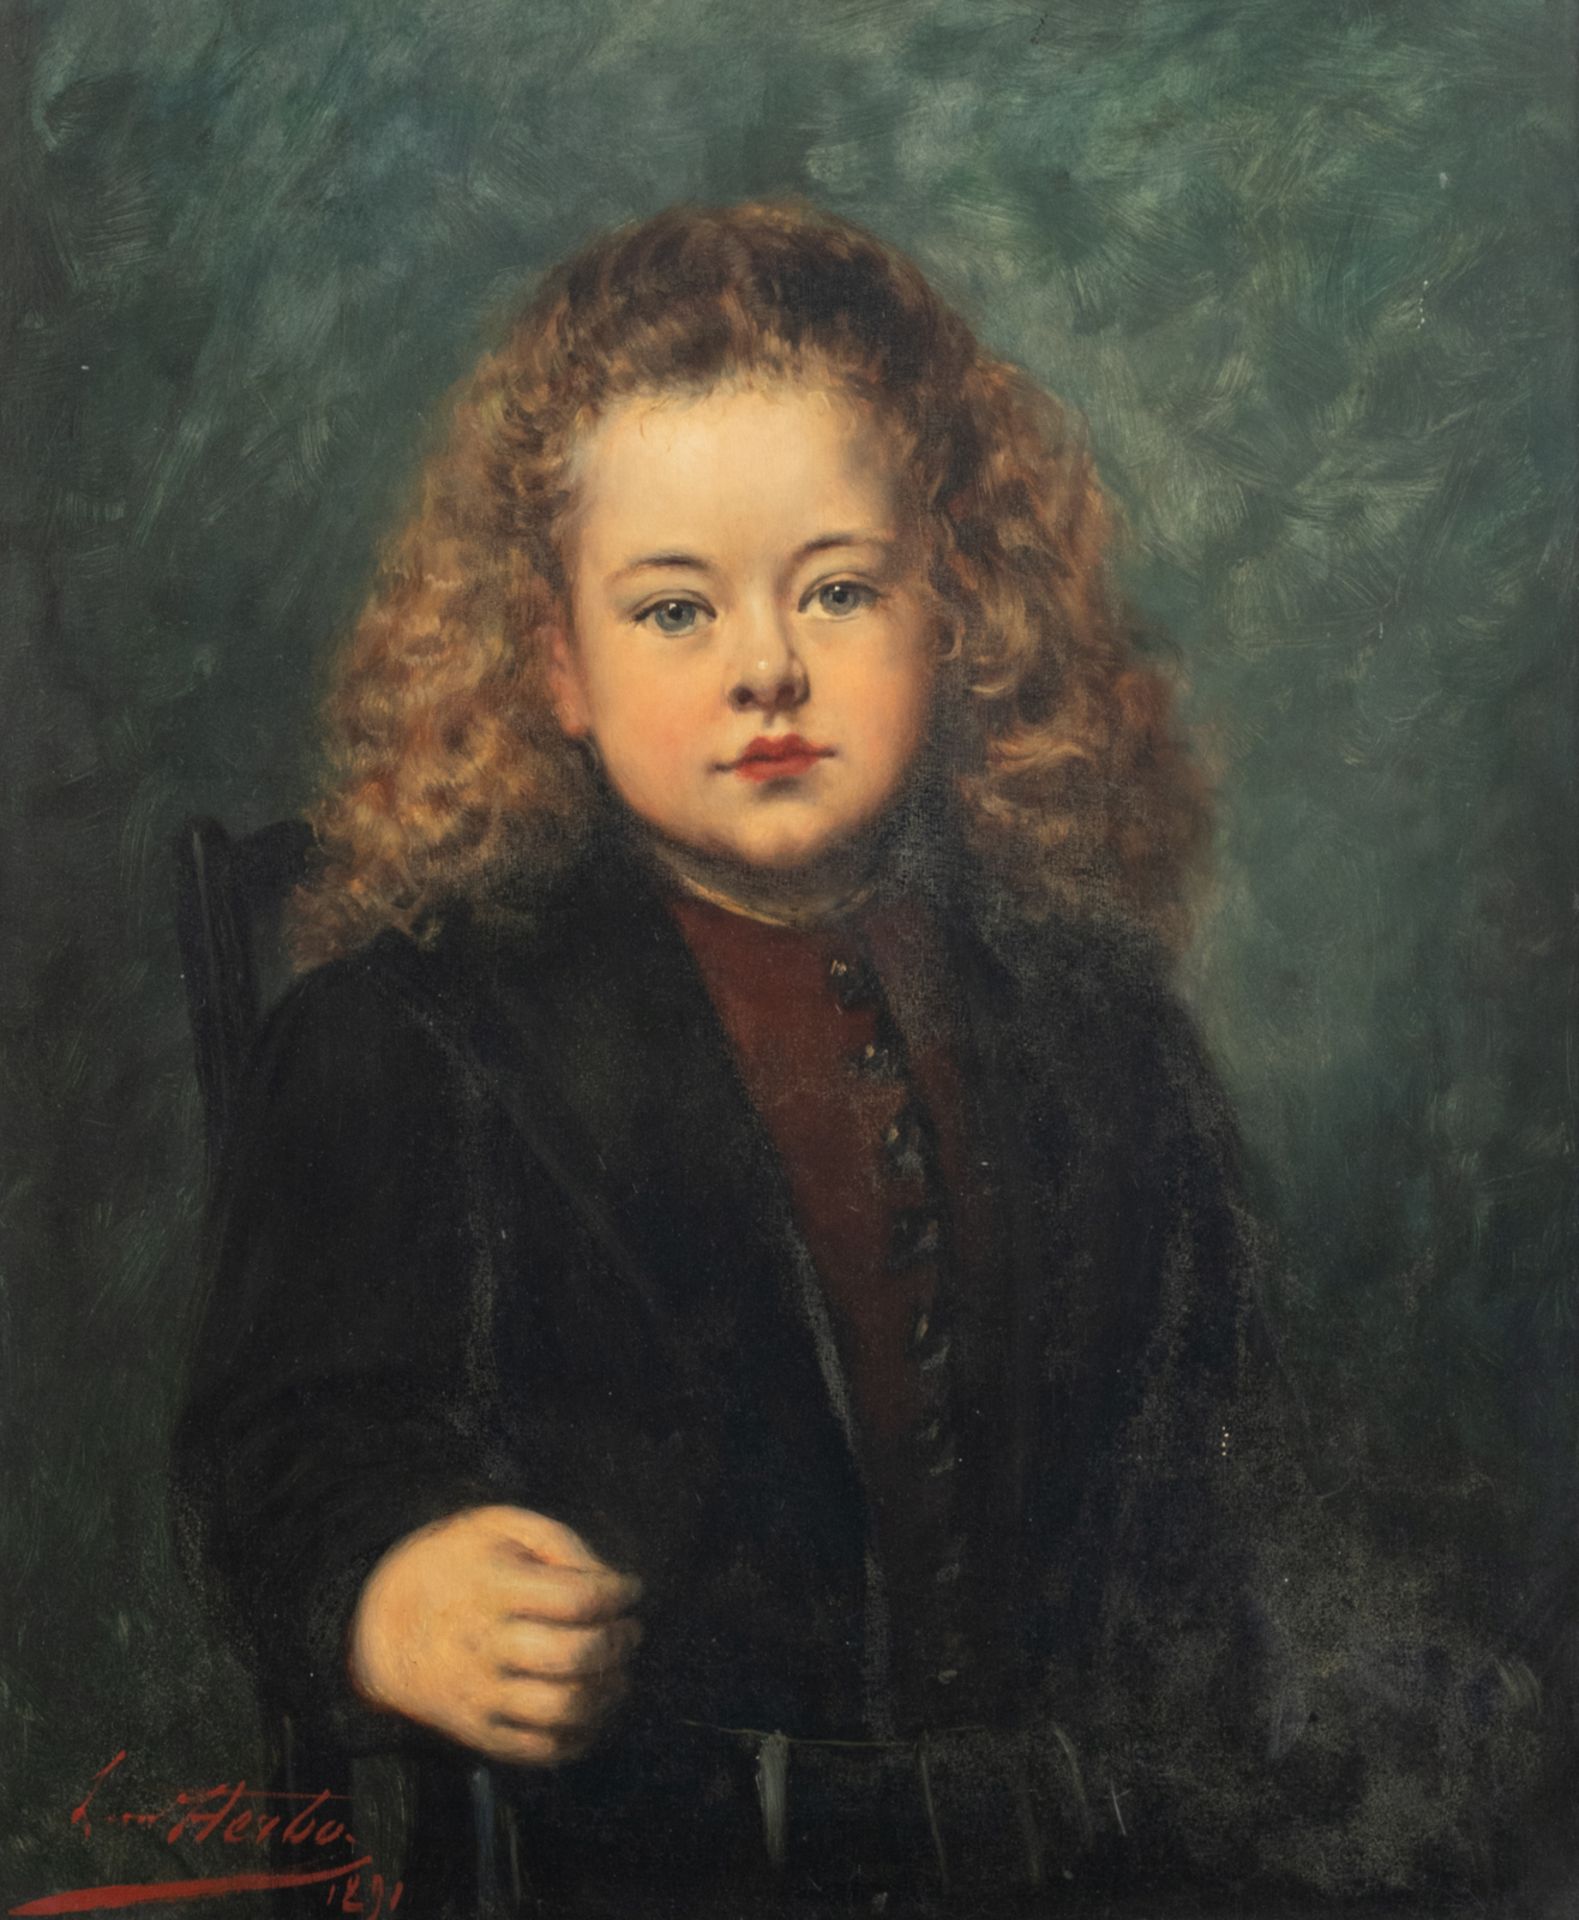 Herbo L., a portrait of a girl, oil on panel, dated 1891, 54 x 67 cm